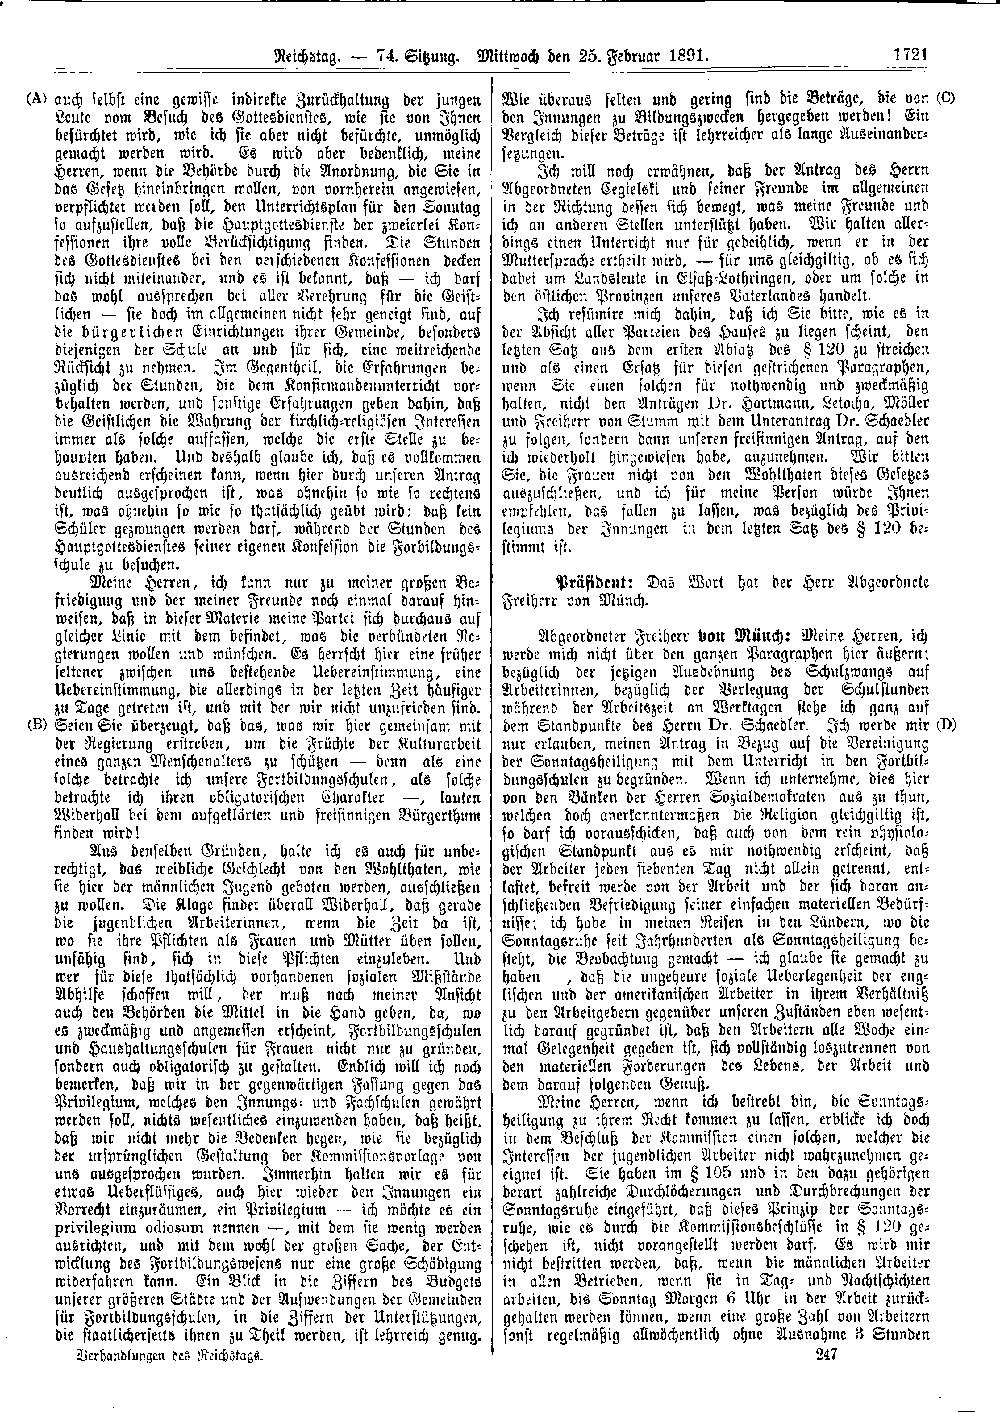 Scan of page 1721